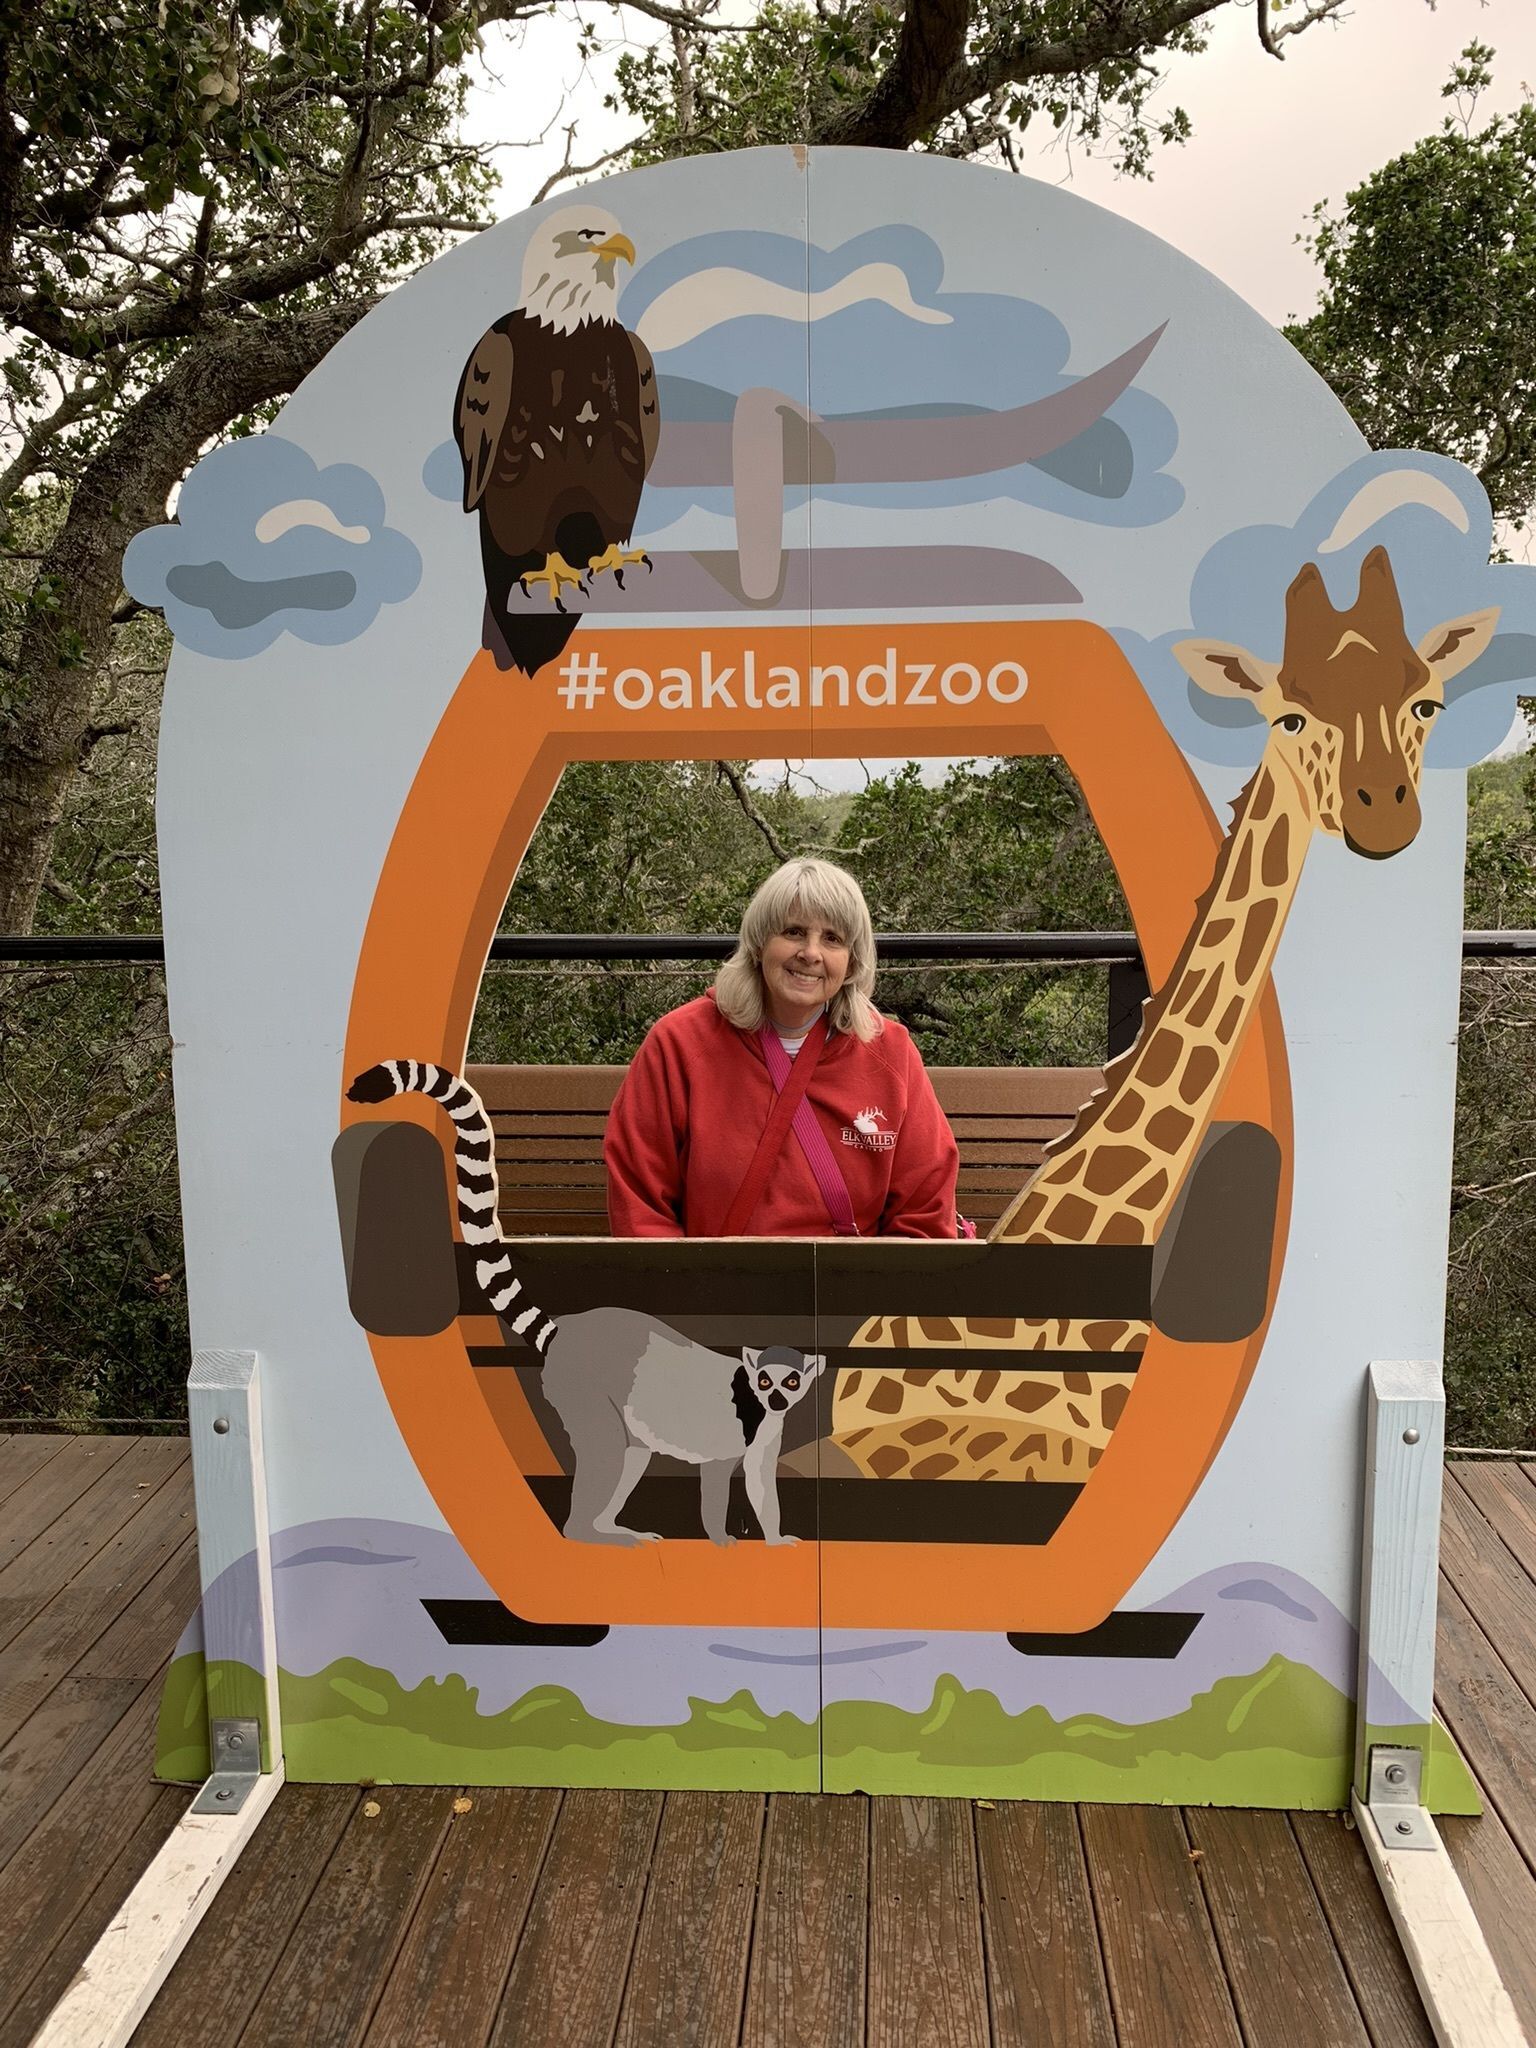 Visiting the Oakland Zoo